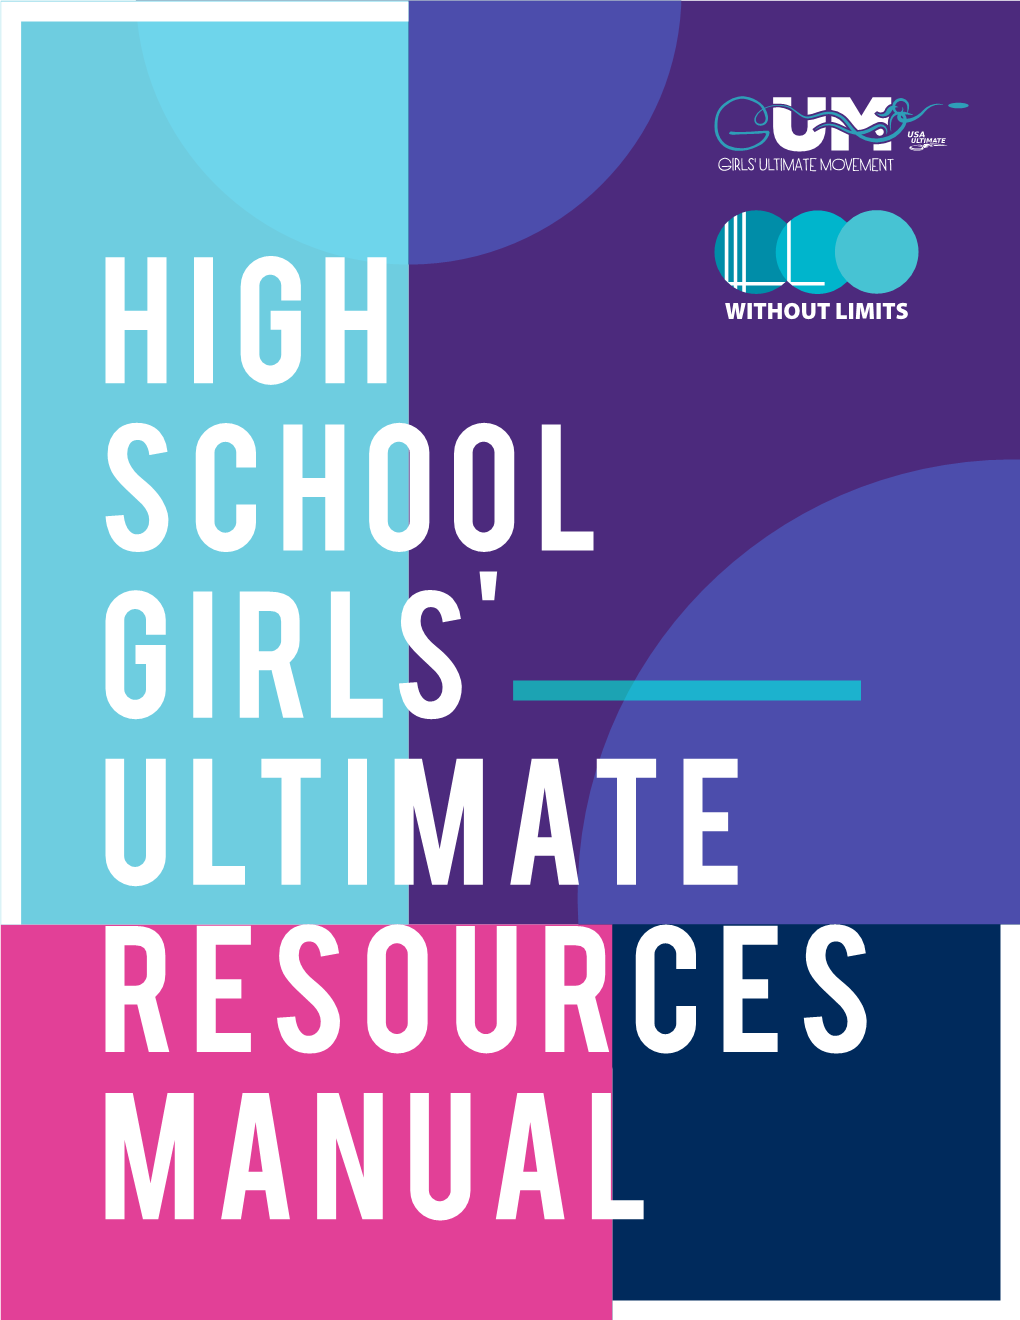 HIGH School Girls' ULTIMATE Resources Manual HIGH SCHOOL GIRLS' ULTIMATE RESOURCES MANUAL